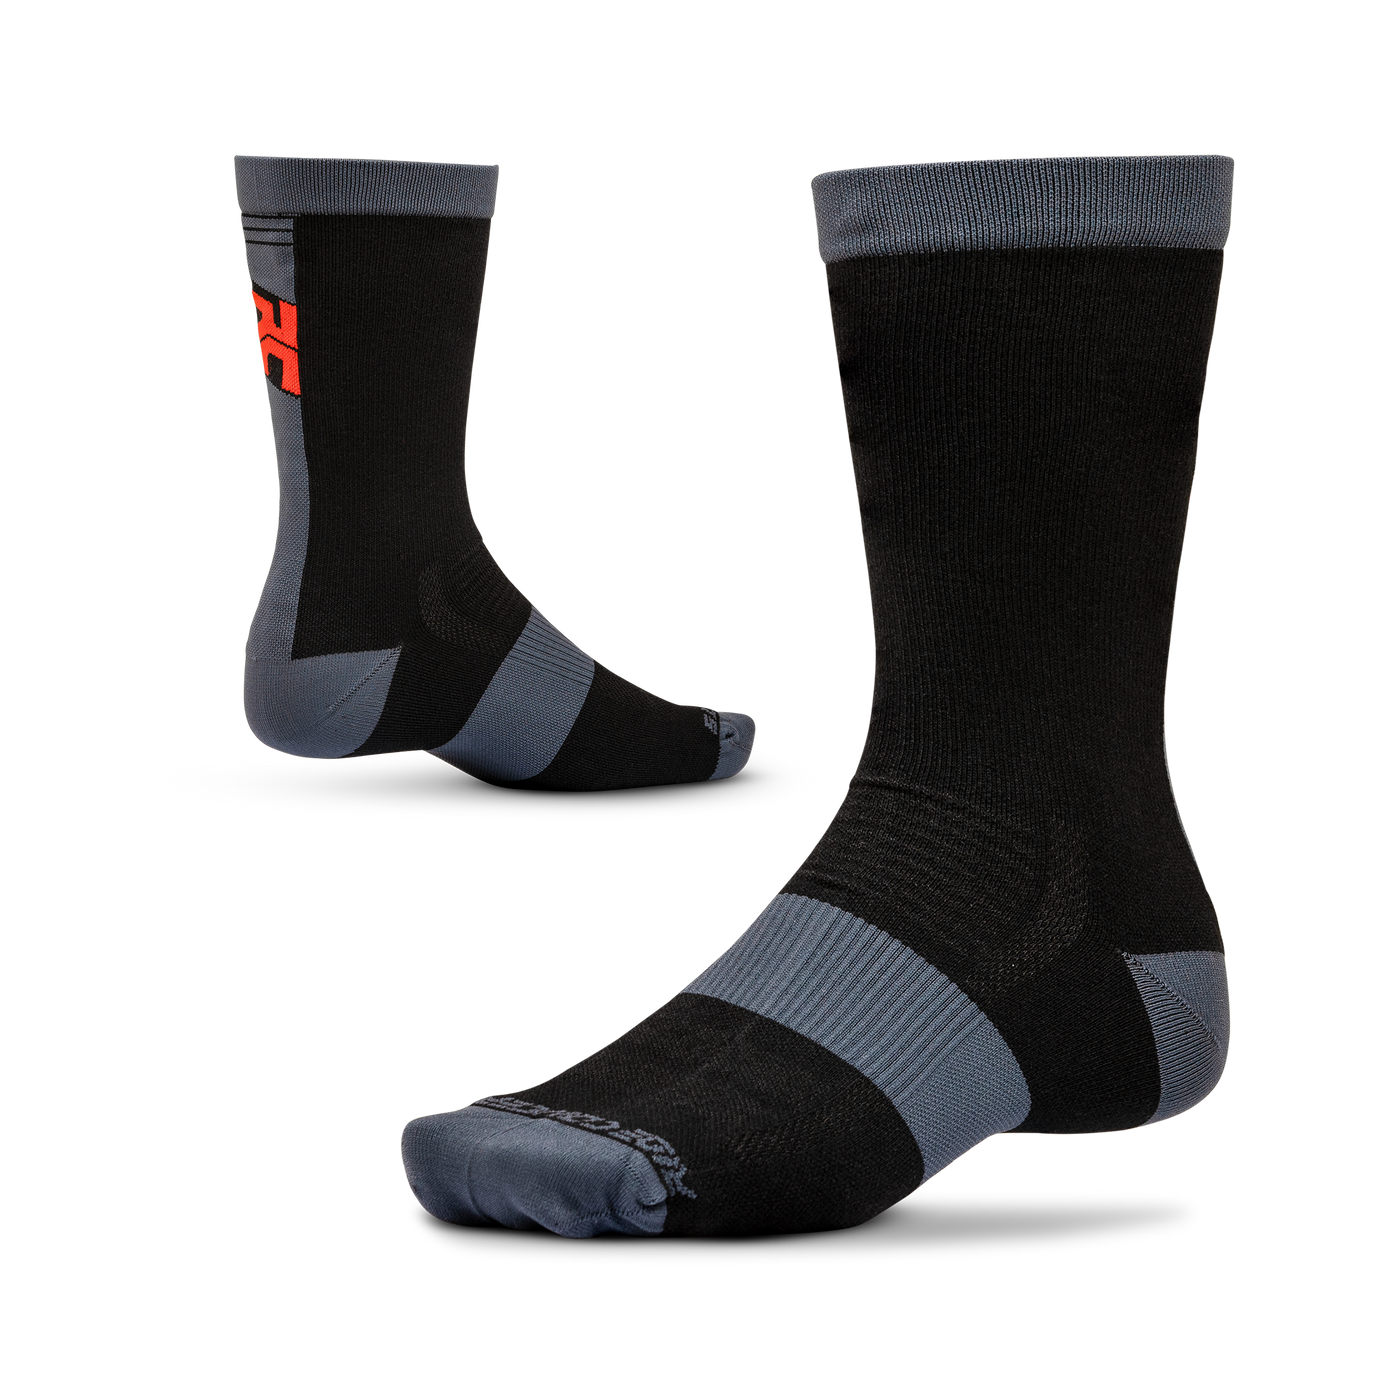 Ride Concepts Mullet MTB Sock - Wool 8" - Black and Red